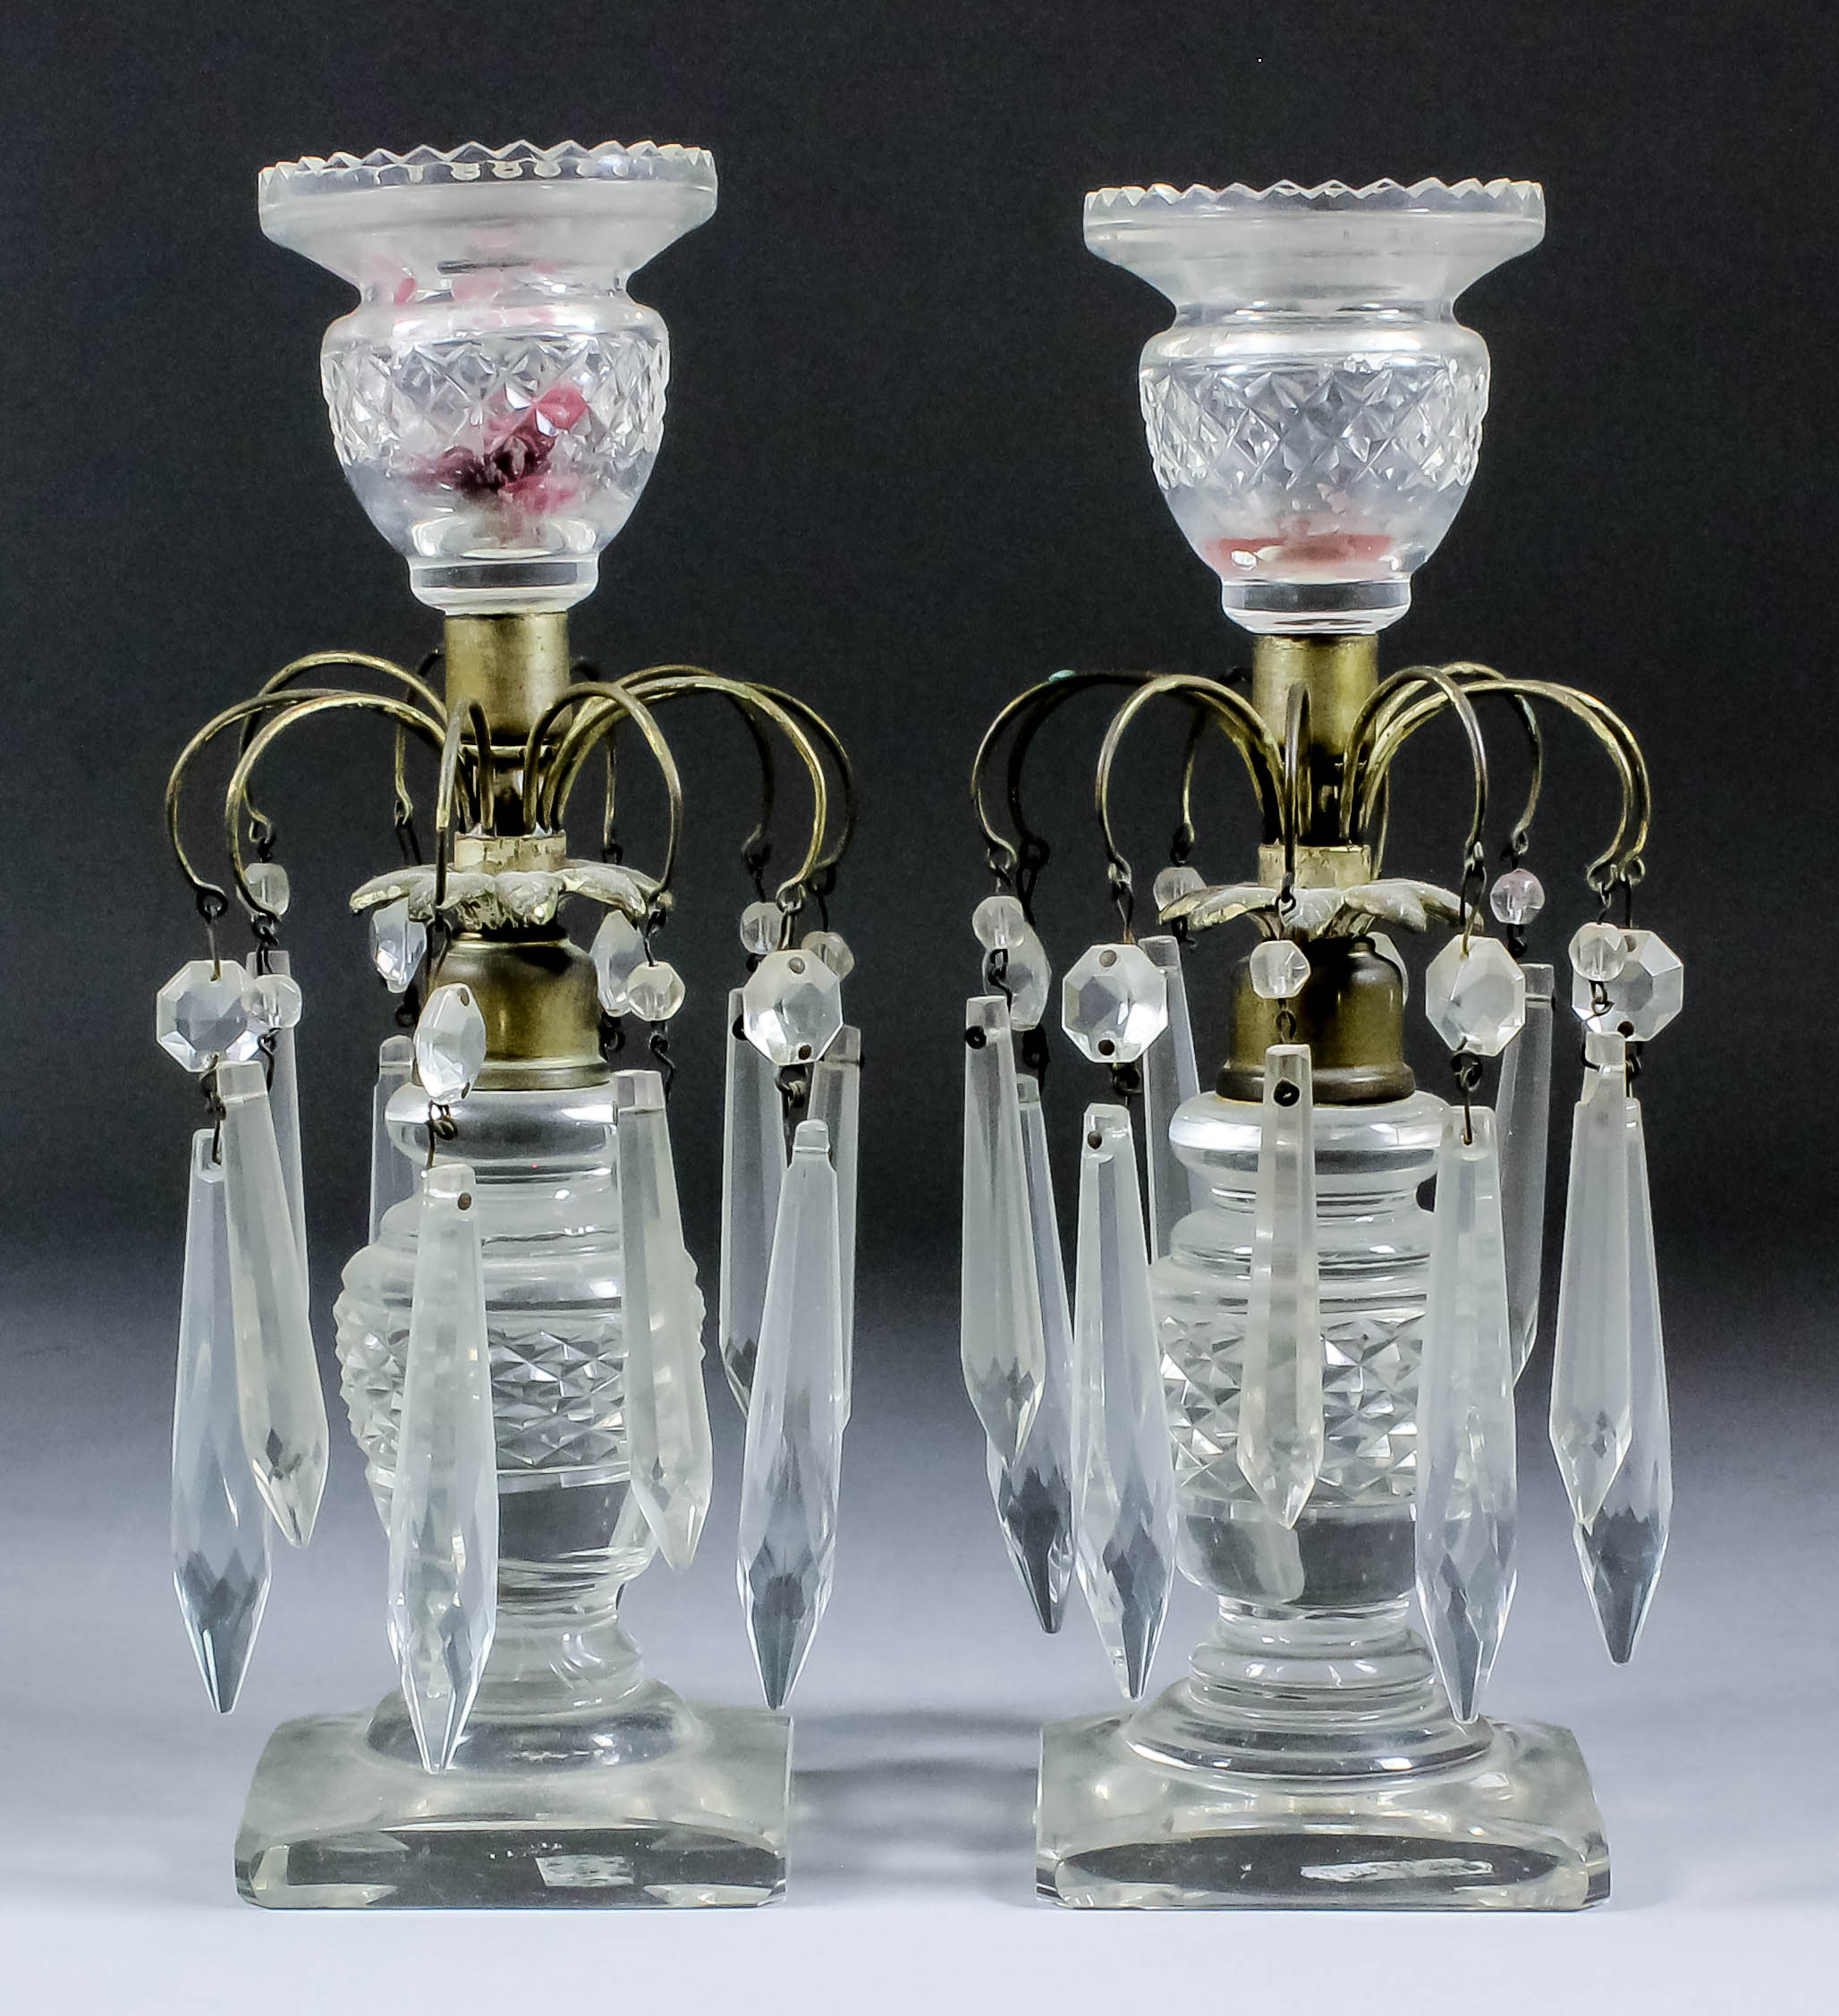 A pair of early 19th Century cut glass and silvered brass pillar candlesticks hung with cut